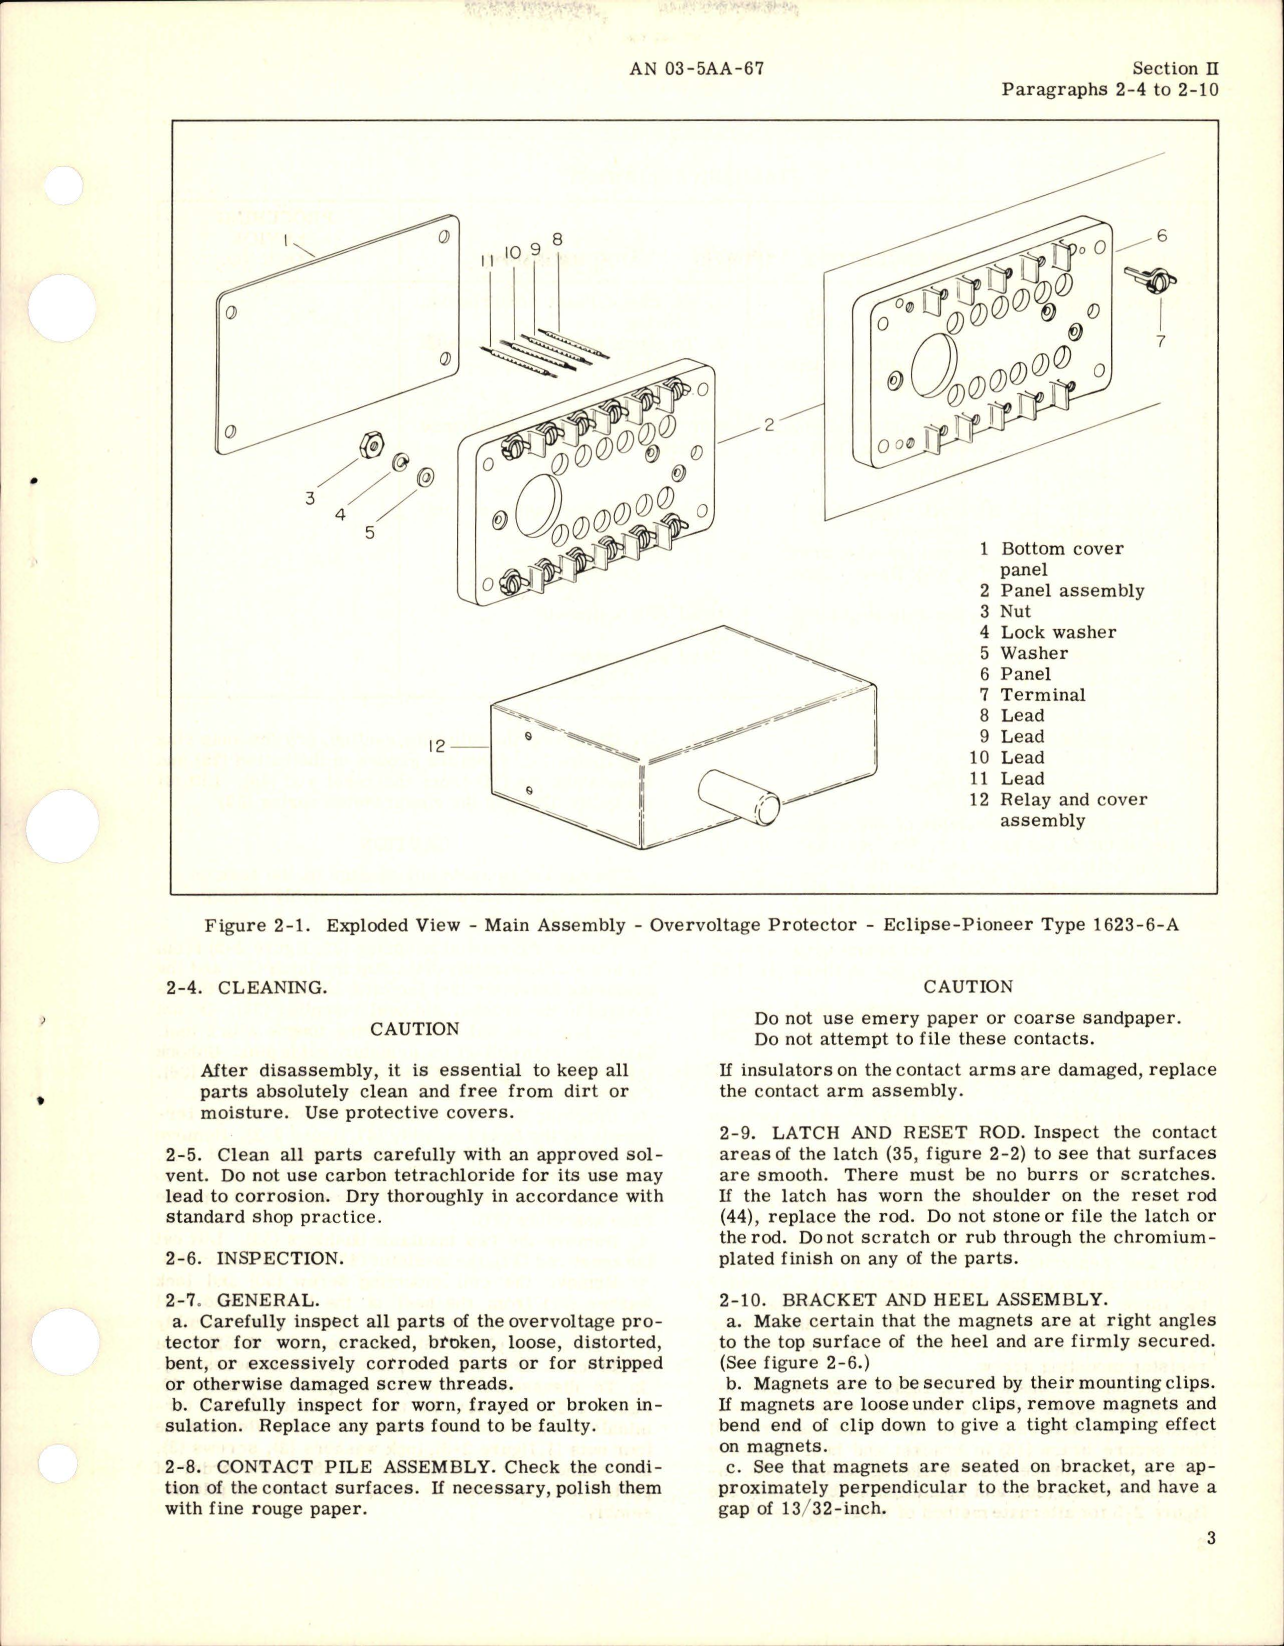 Sample page 7 from AirCorps Library document: Overhaul Instructions for Overvoltage Protector - Part 1623-6-A